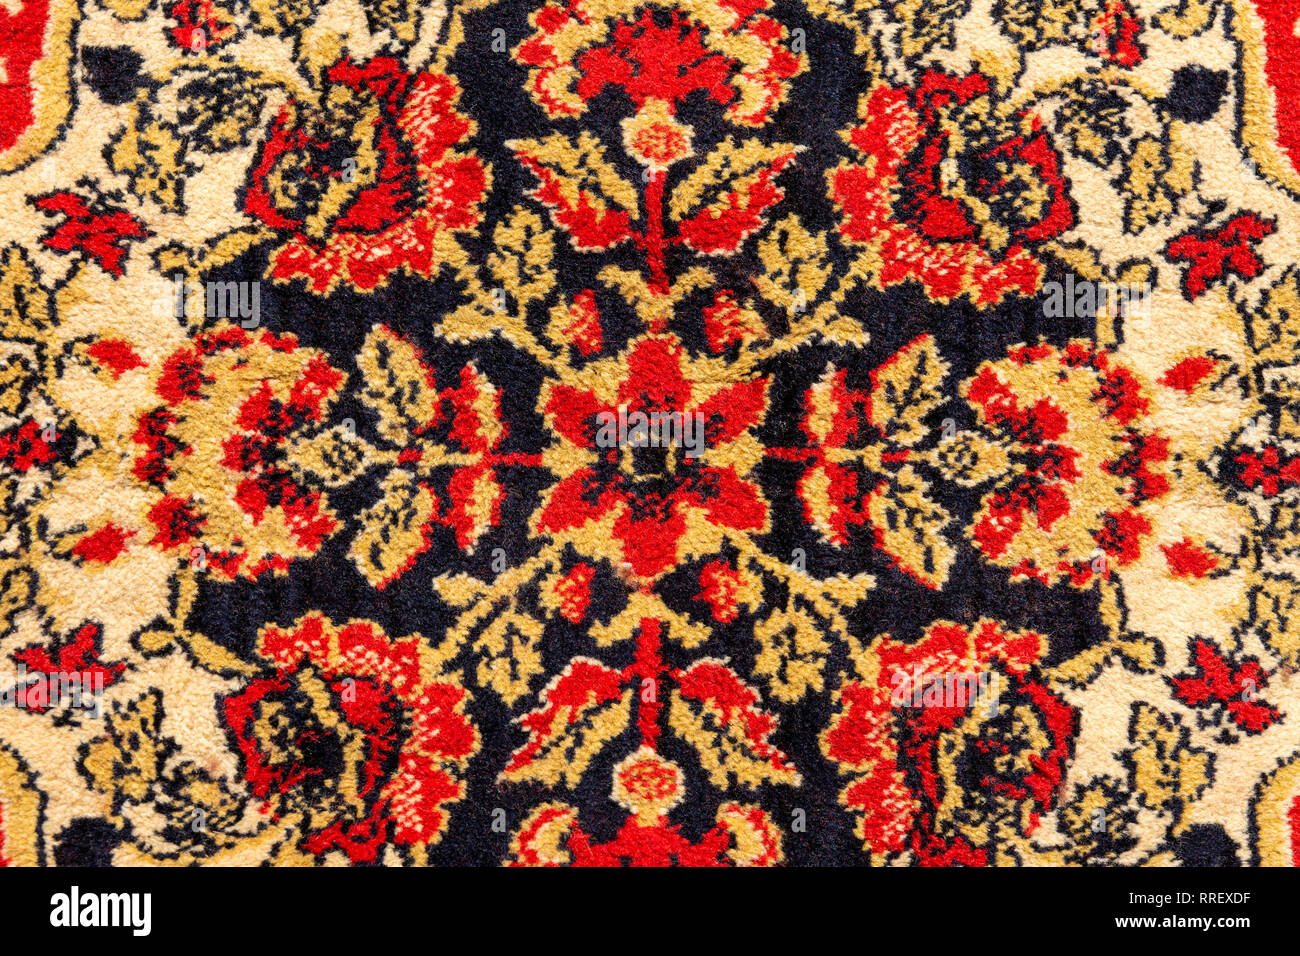 Ornament details of a vintage Persian carpet of vivid red, brown, yellow and black colors. Textile pattern or background Stock Photo